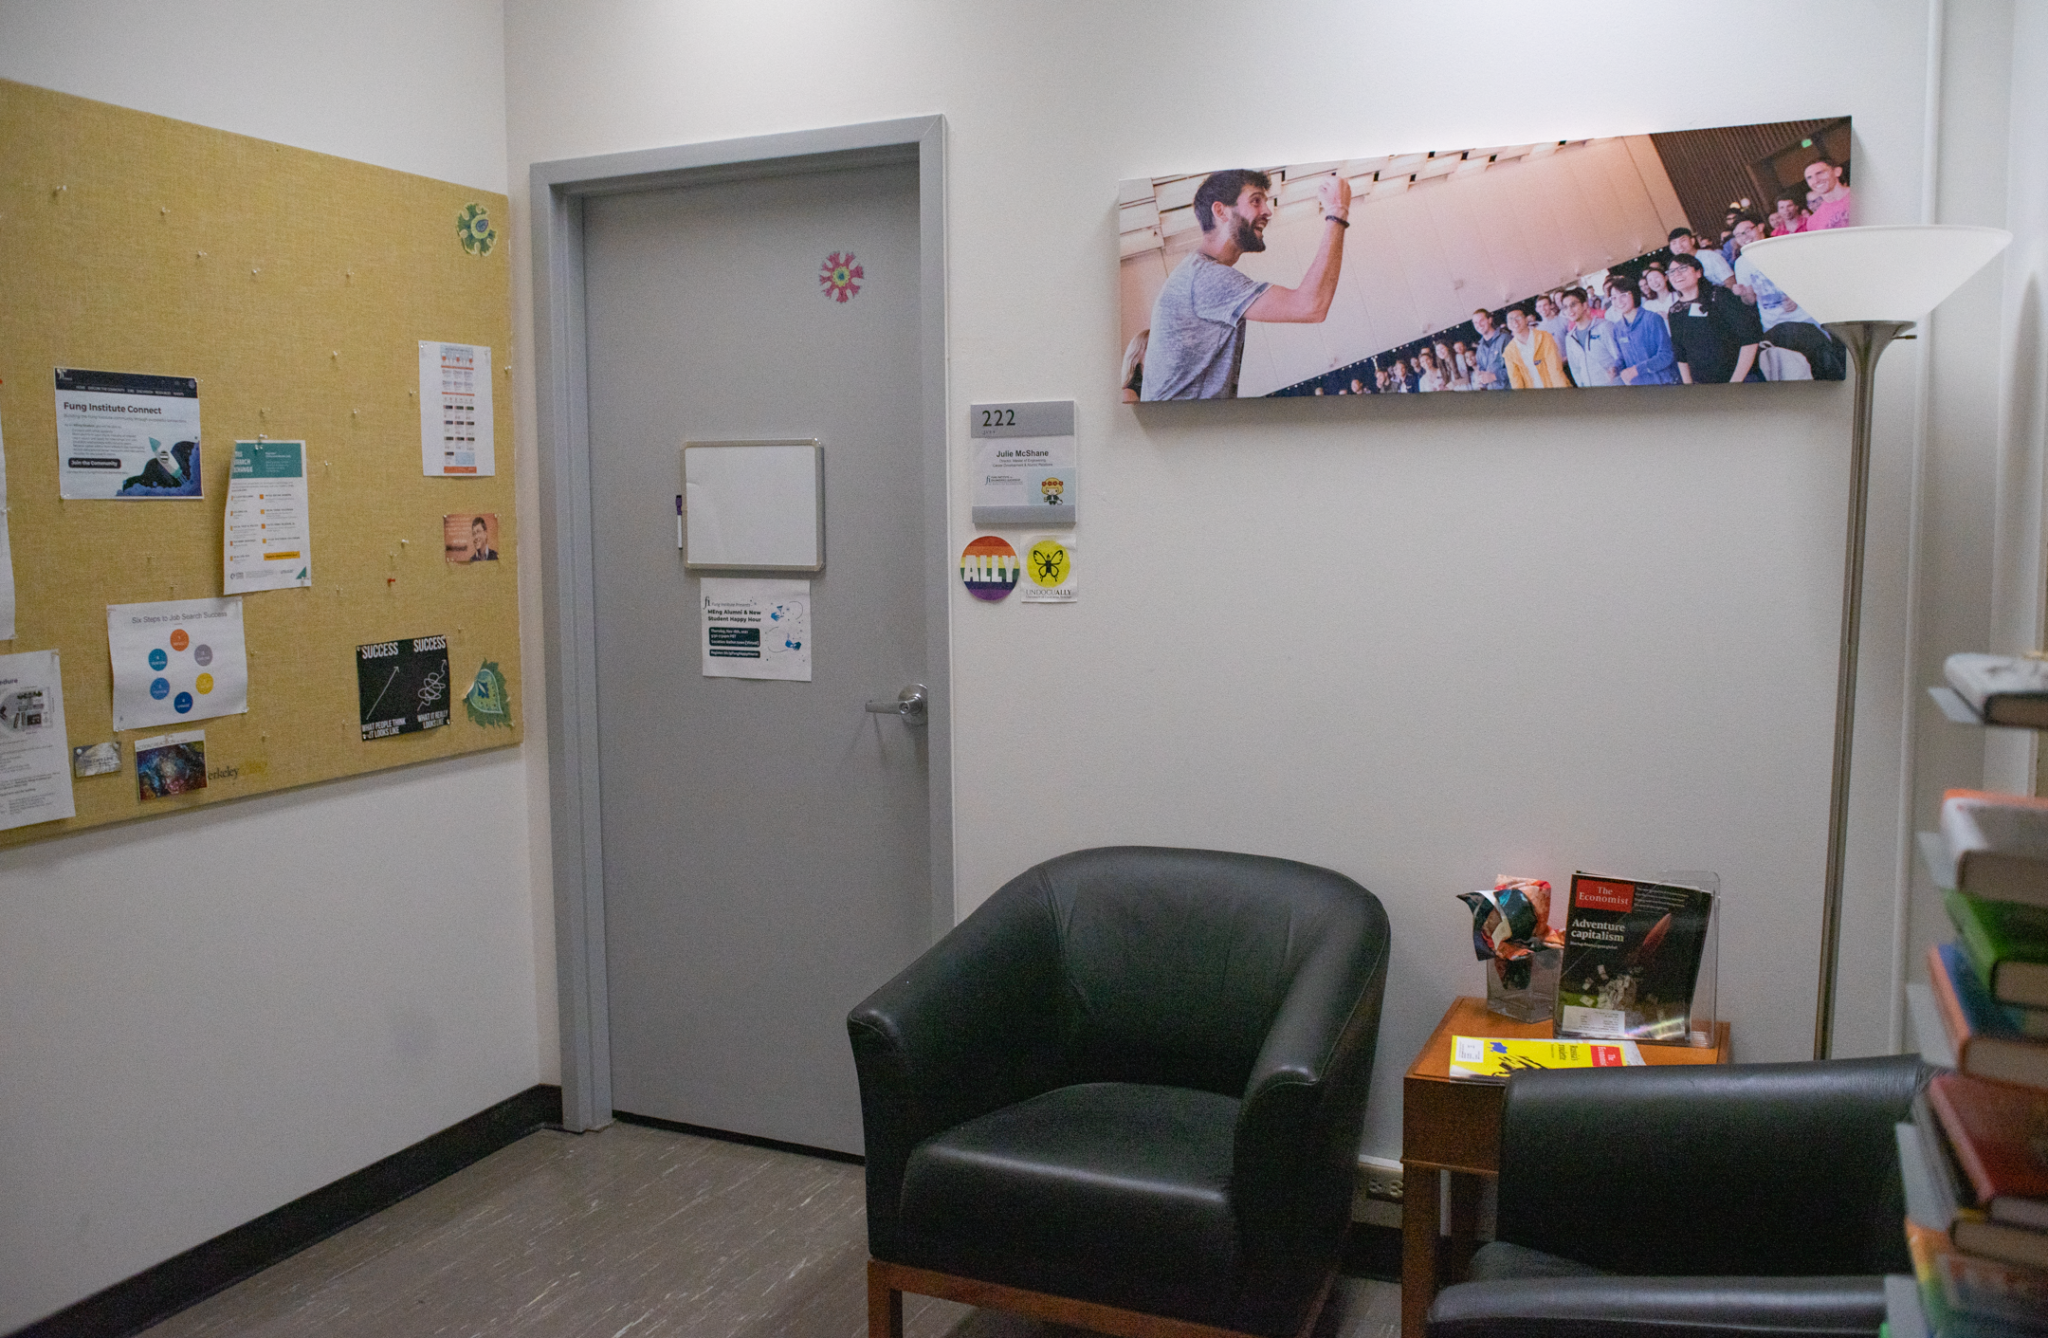 The waiting area outside of one of our career development advisor's office doors.